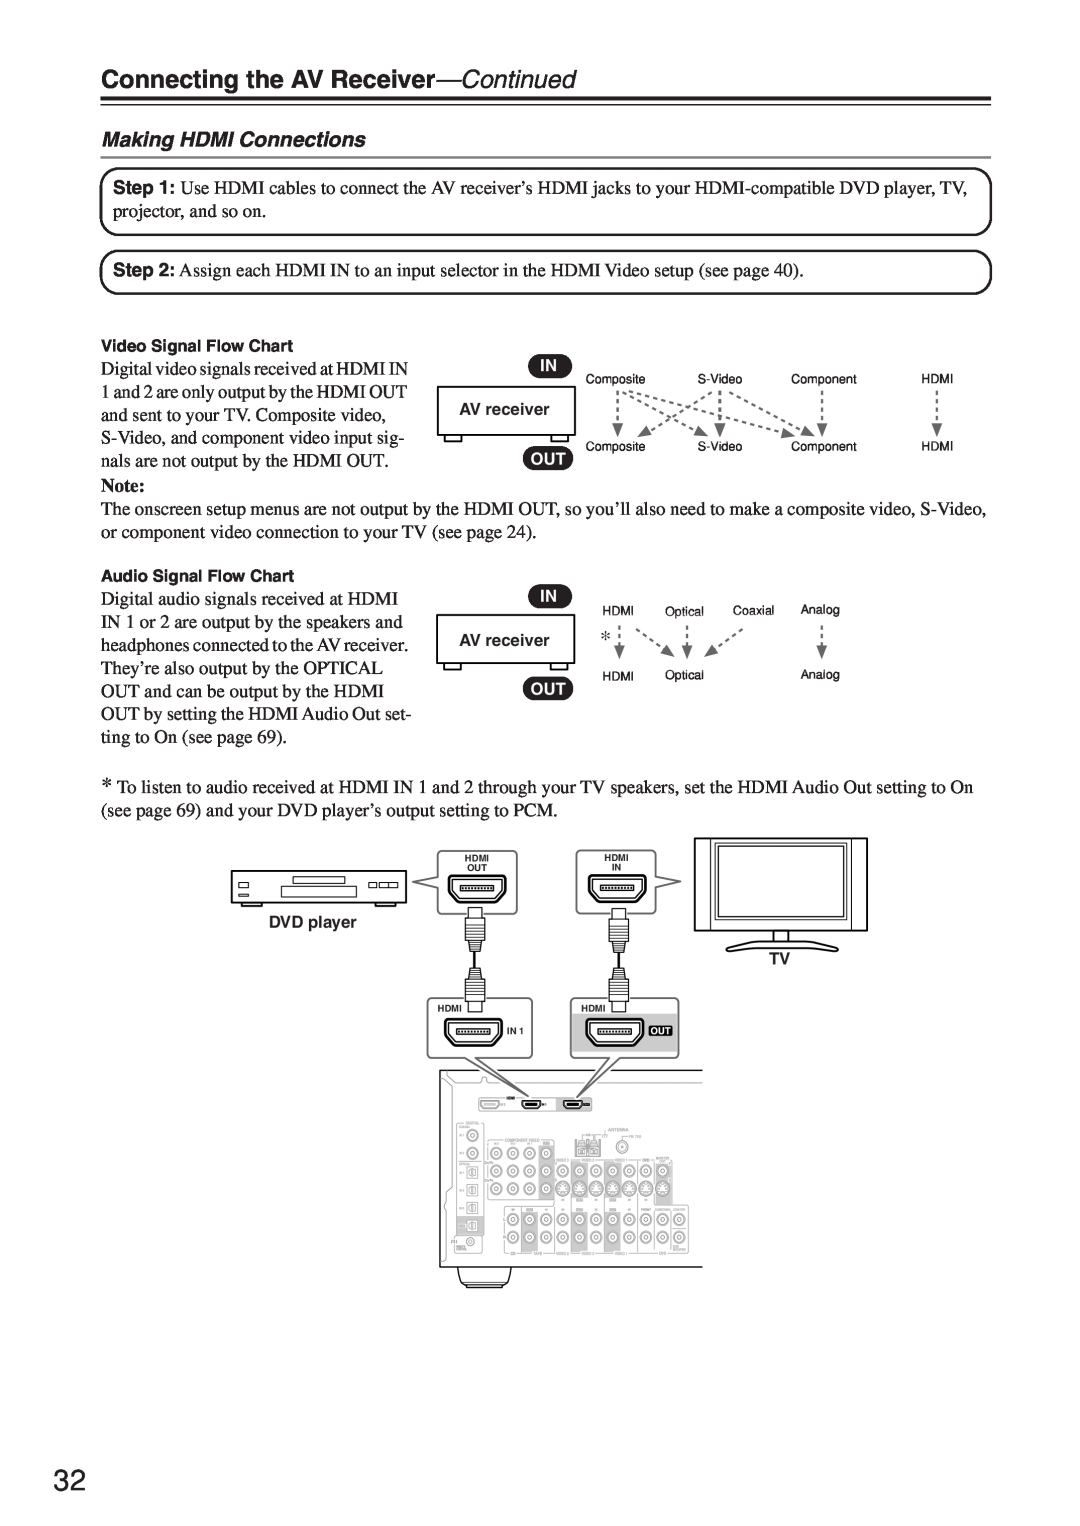 Onkyo HT-R640 instruction manual Making HDMI Connections, Connecting the AV Receiver-Continued 